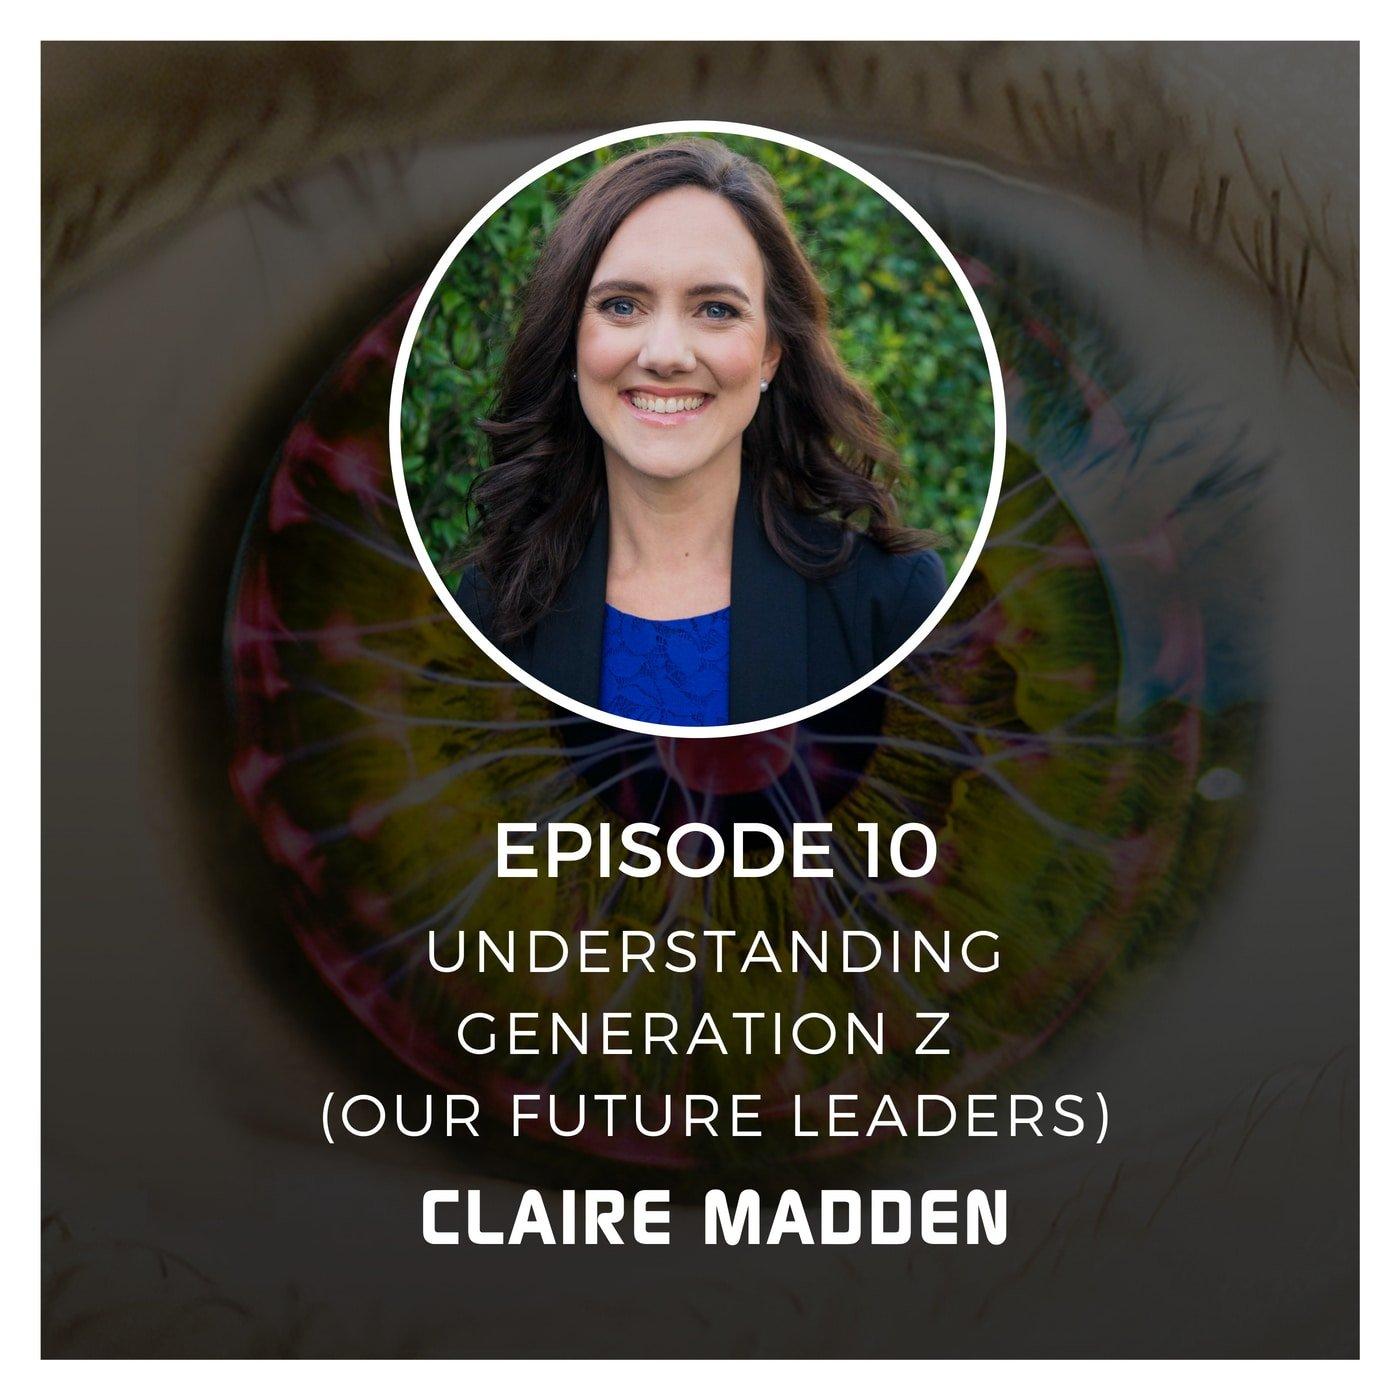 Understanding Generation Z (Our Future Leaders) with Claire Madden - Episode 10